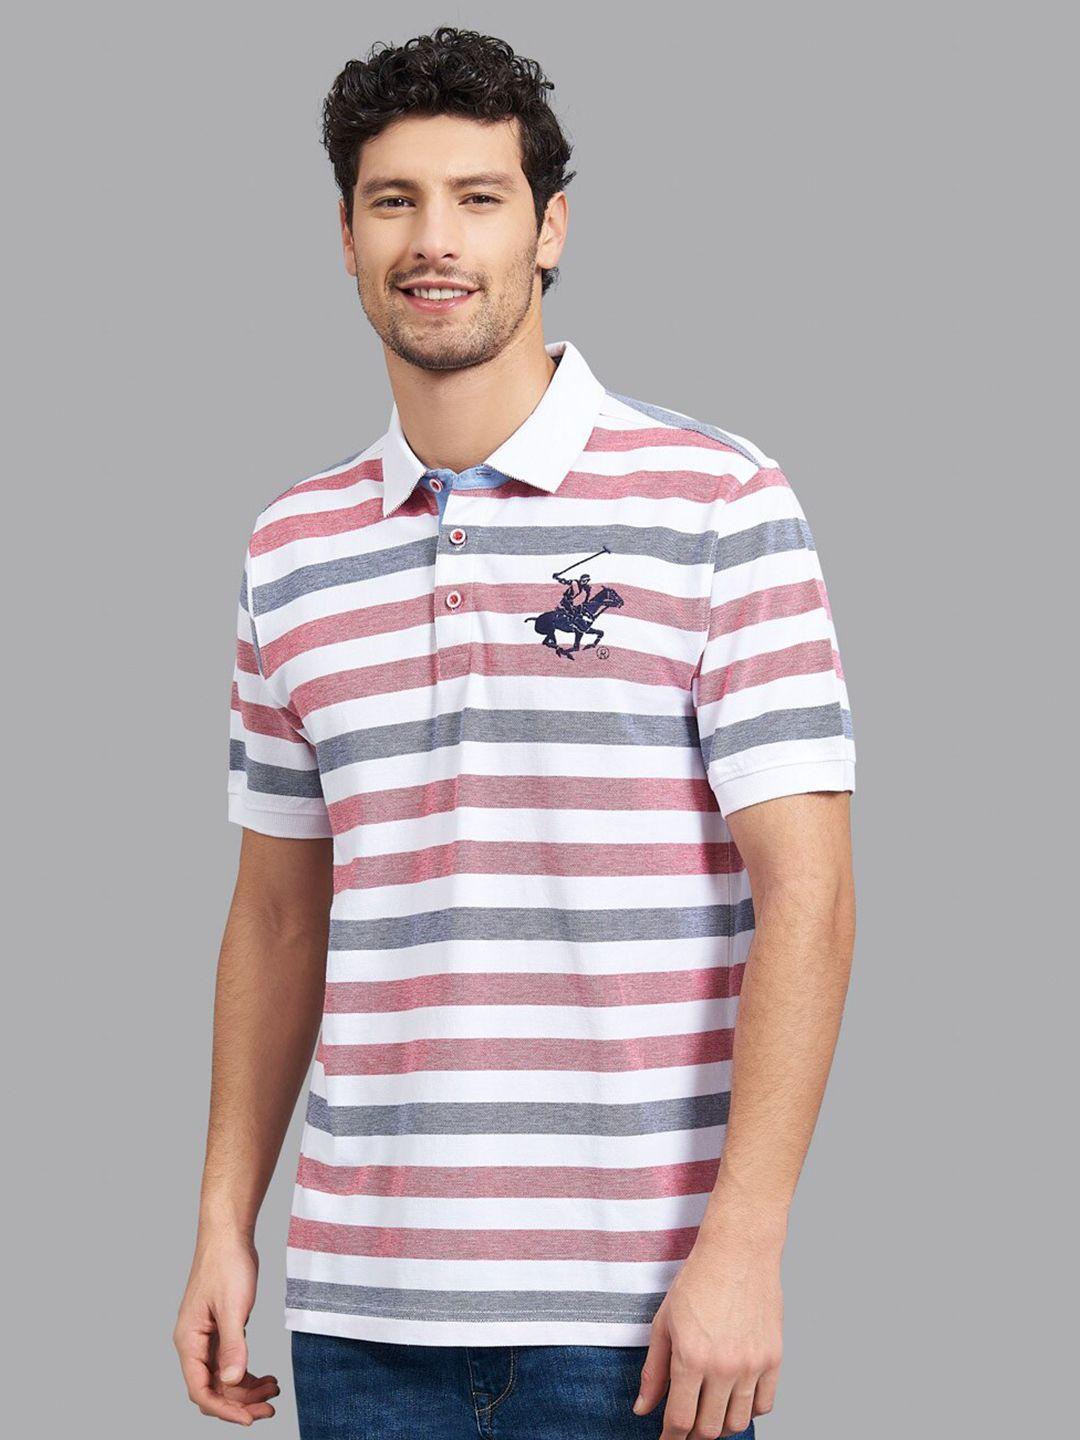 beverly-hills-polo-club-men-white-&-coral-striped-polo-collar-t-shirt